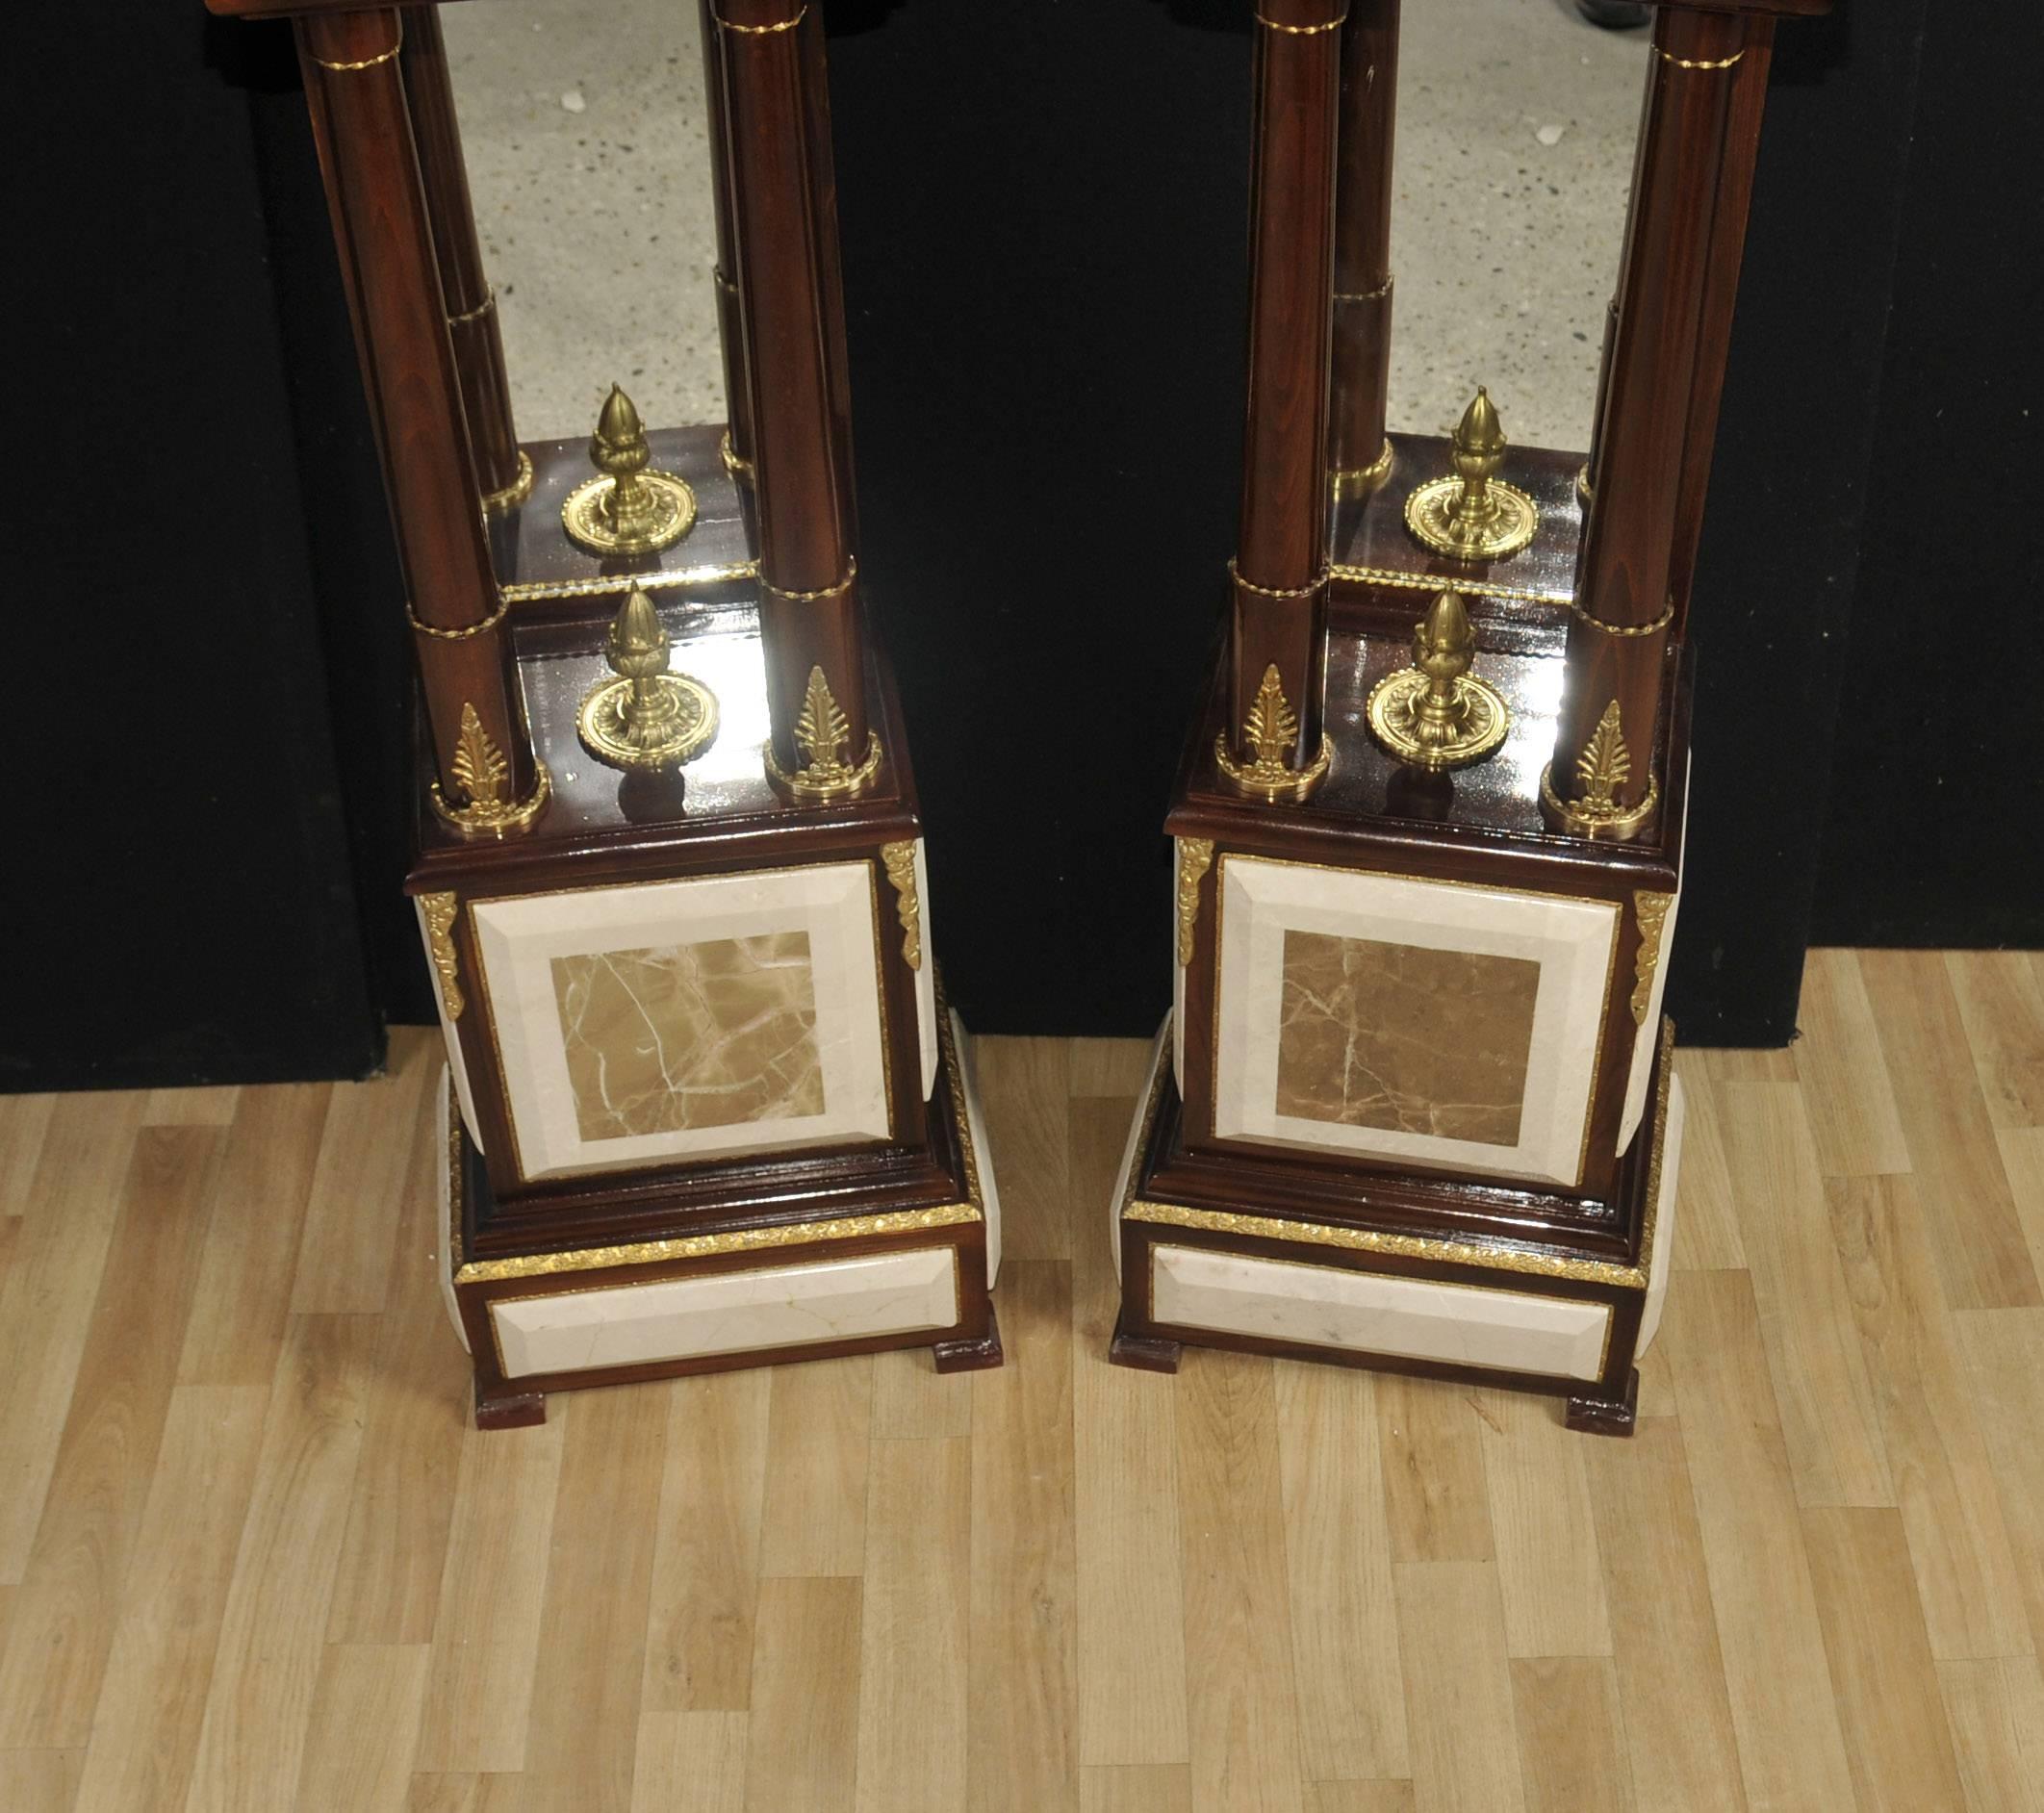 Stunning pair of French Empire style marble column stands.
Great for displaying vases, busts and other decorative pieces.
Mirrored section great for adding space and light to any interior.
Handcrafted from kingwood, marble, ormolu and with